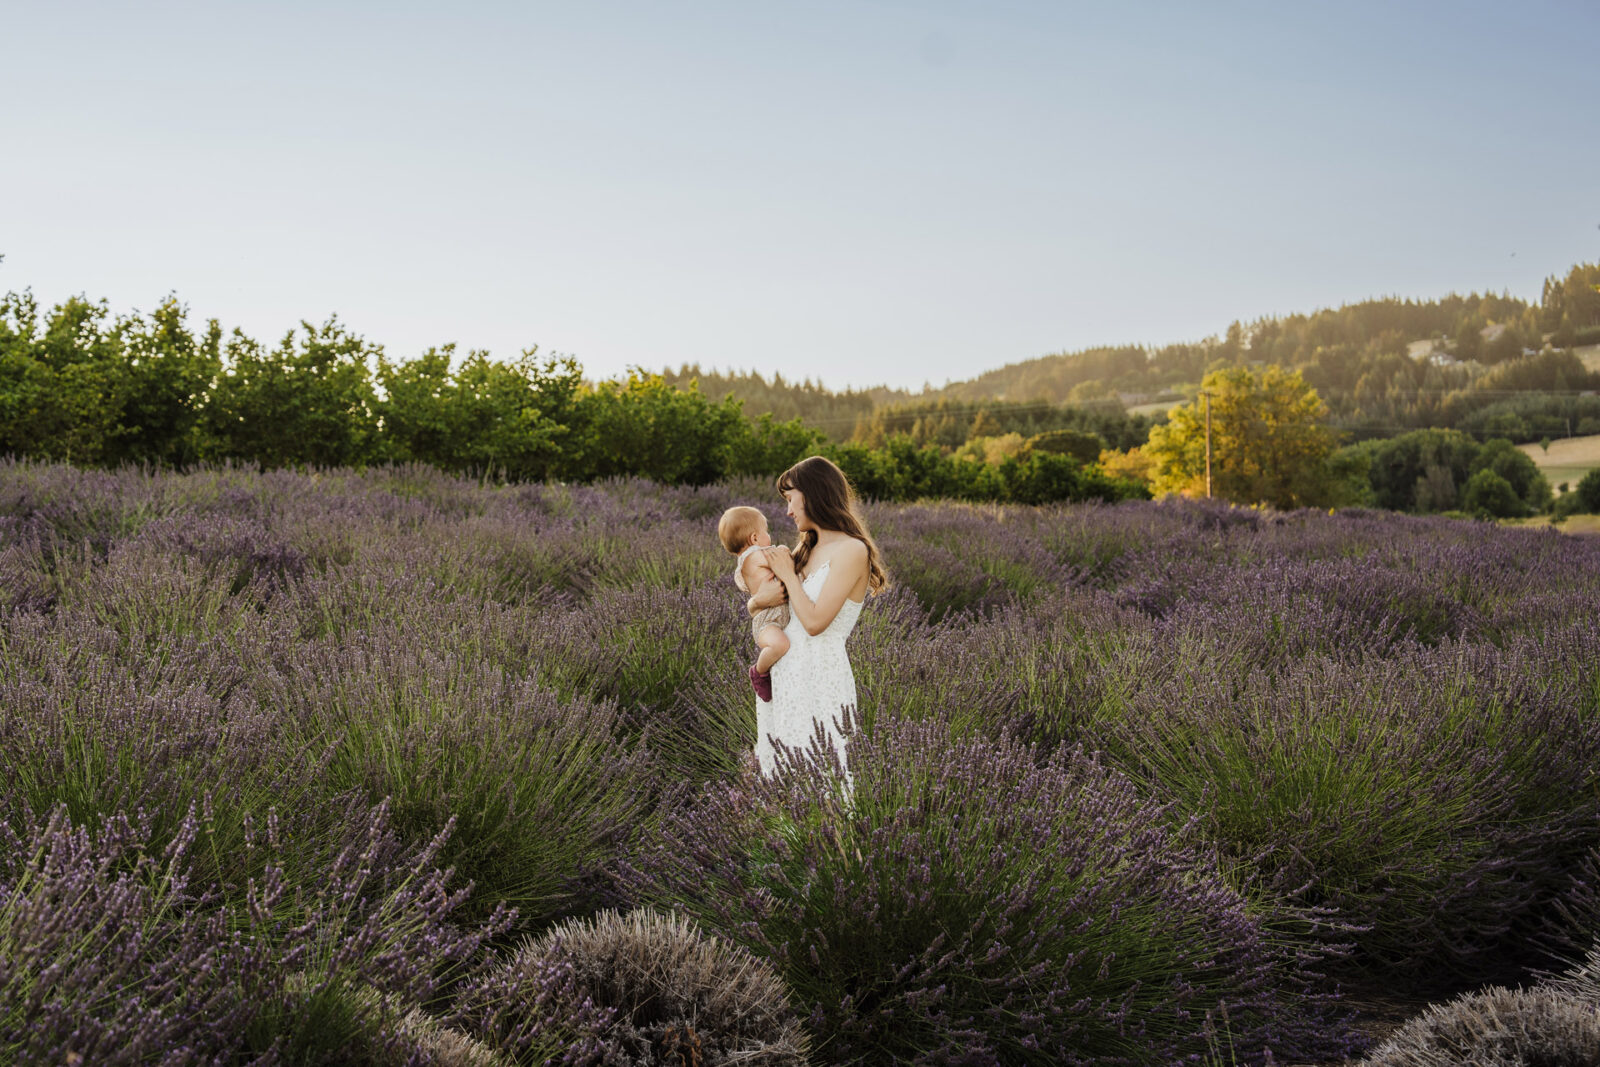 Lavender field family photography by Natalie Broders in Banks, OR - July 4 through July 21